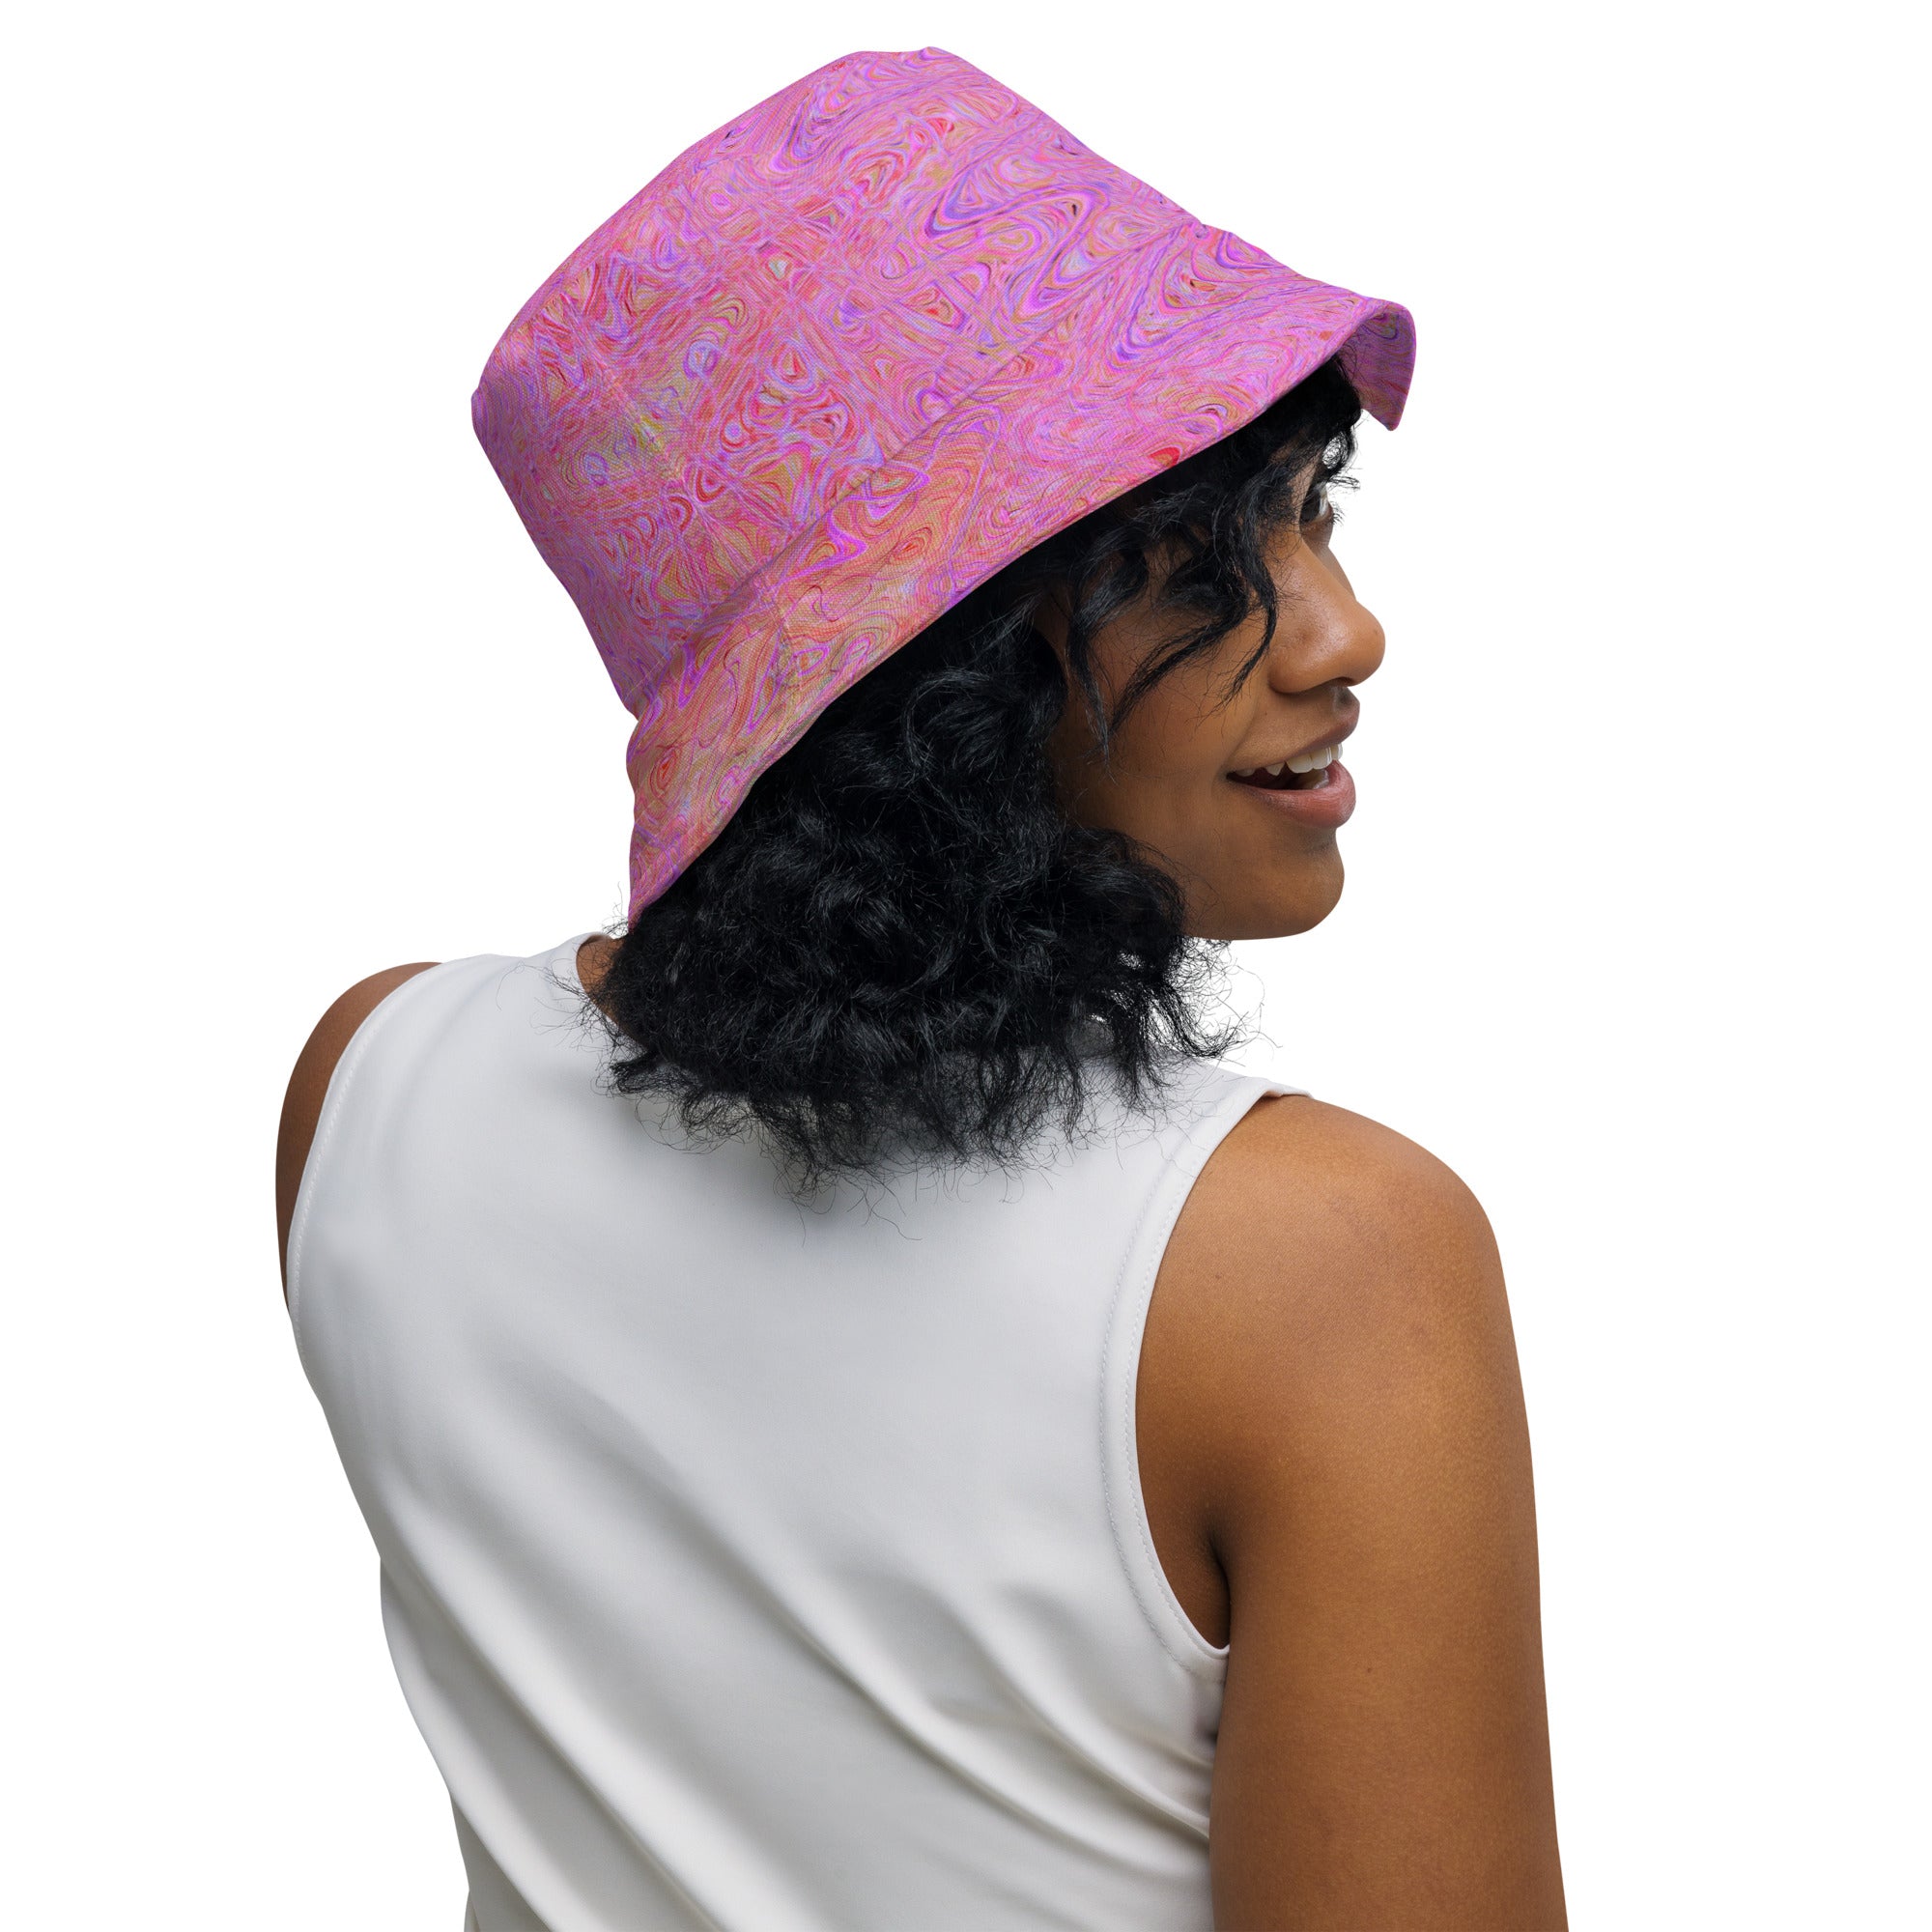 Reversible Bucket Hat | Retro Abstract Pink and Orange Squiggly Lines